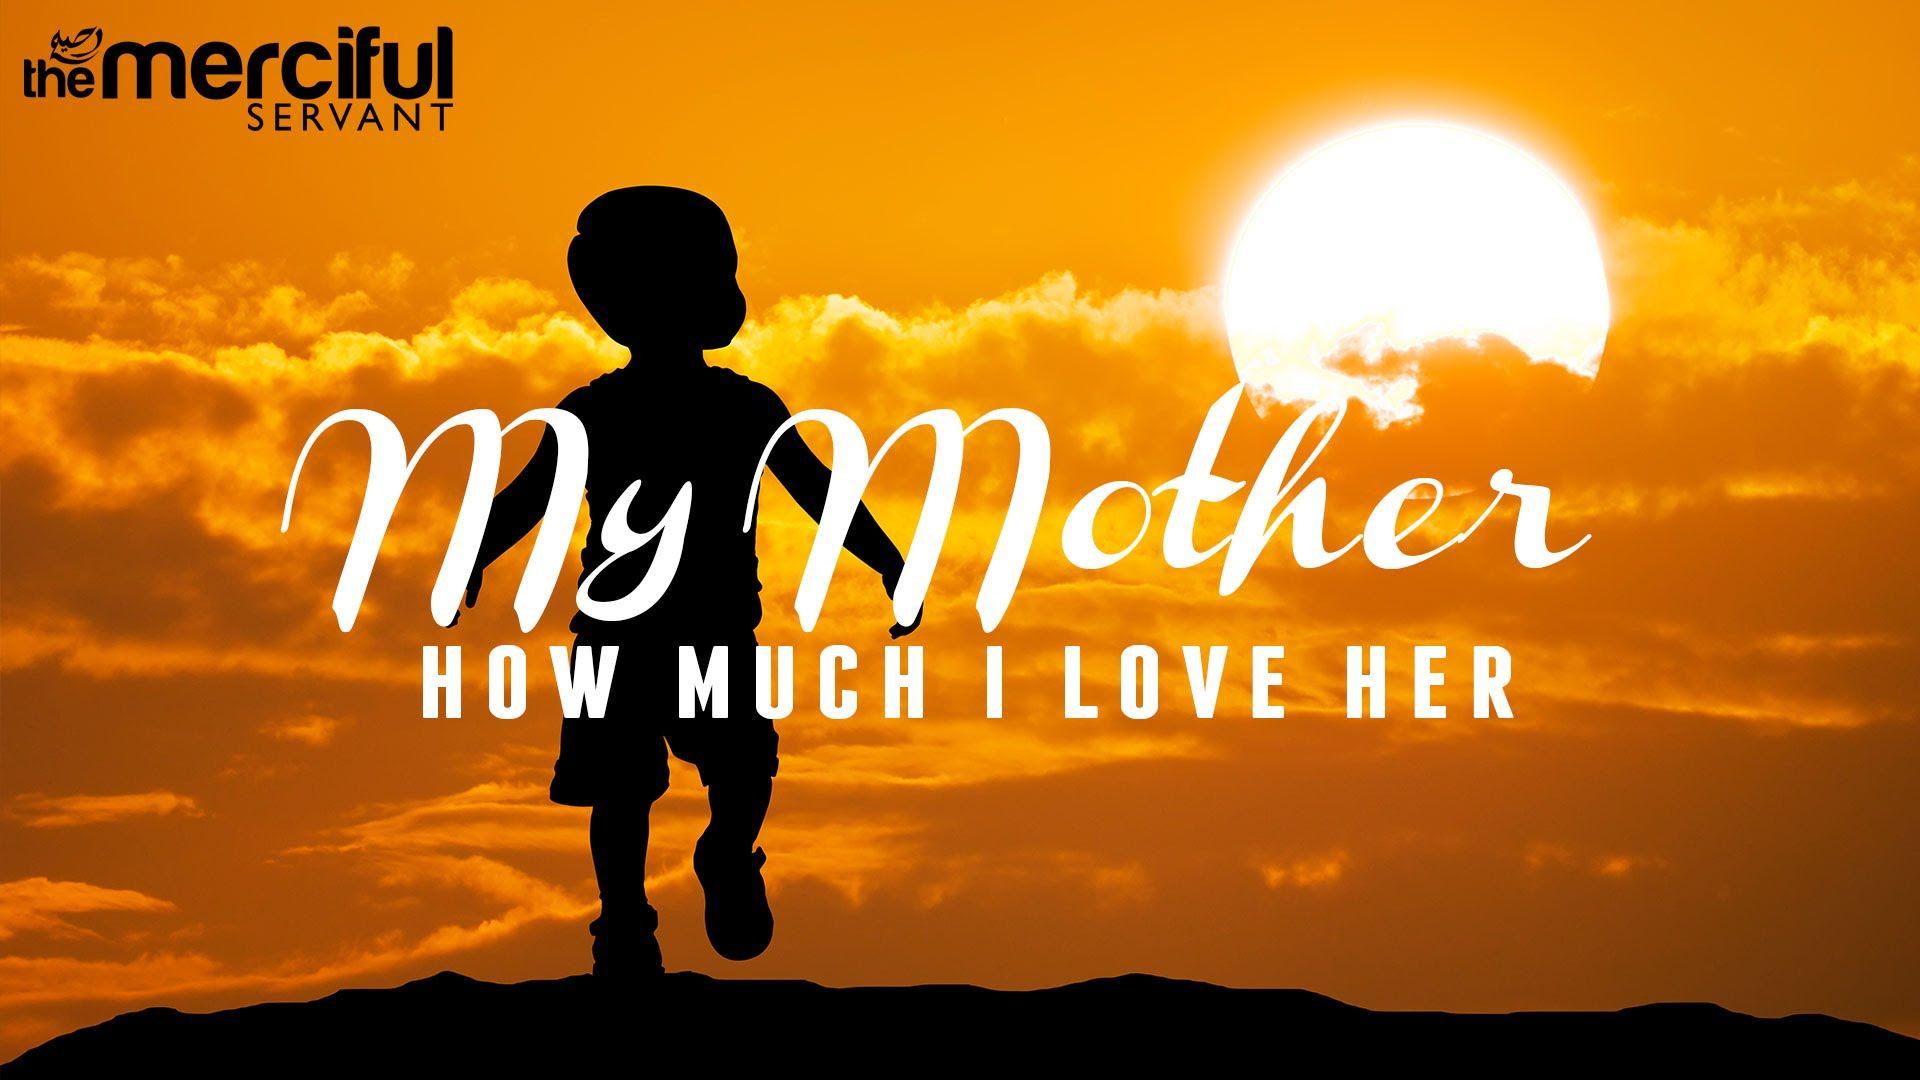 I love my mom and dad wallpaper download (30 Wallpaper)